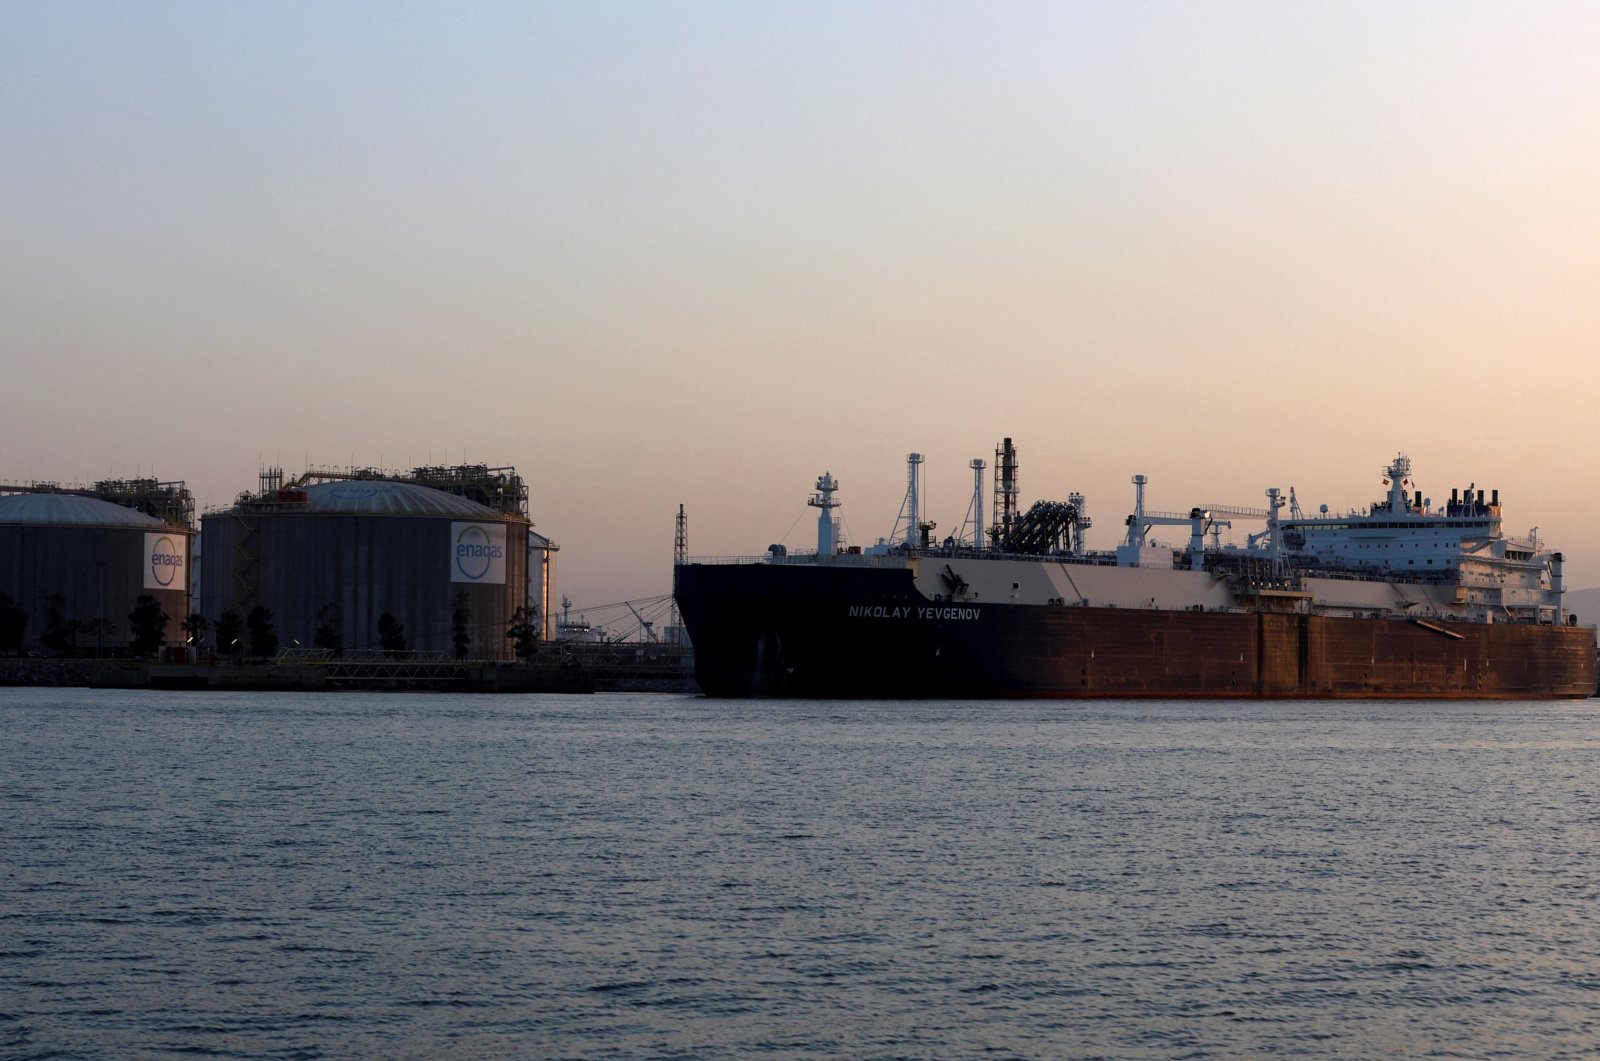 The Nikolay Yevgenov, a ship carrying Russian liquefied natural gas (LNG), is seen next to the terminal of Spanish gas grid operator Enagas ENAG.MC, at the port of Barcelona, Spain, June 4, 2022. (Reuters Photo)